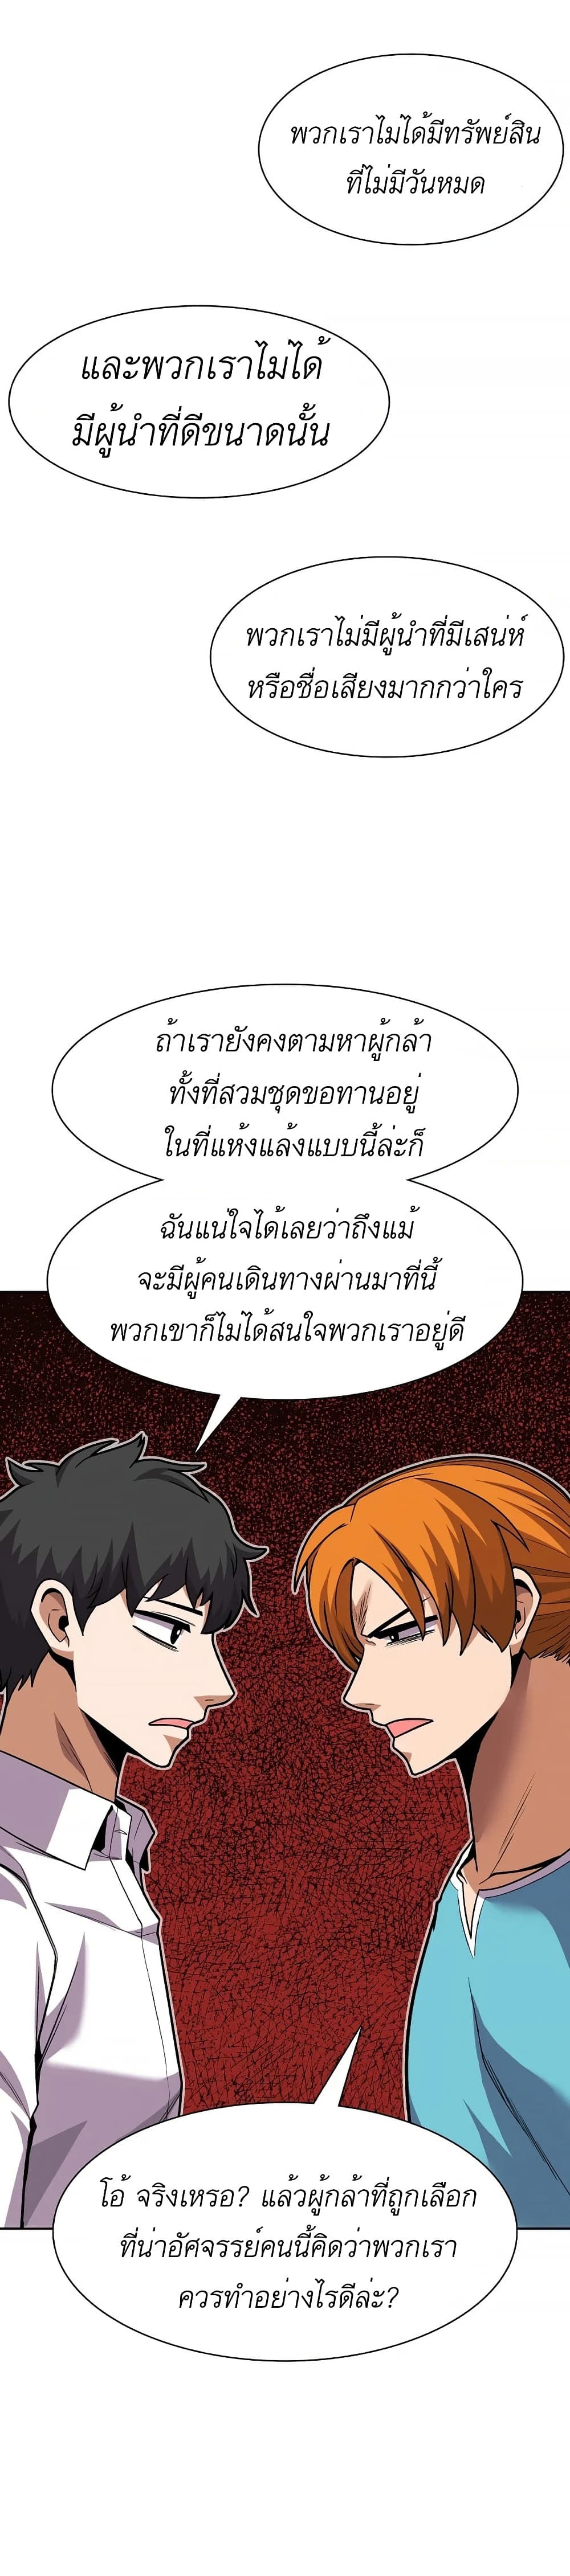 Raising Newbie Heroes In Another World ตอนที่ 11 (9)